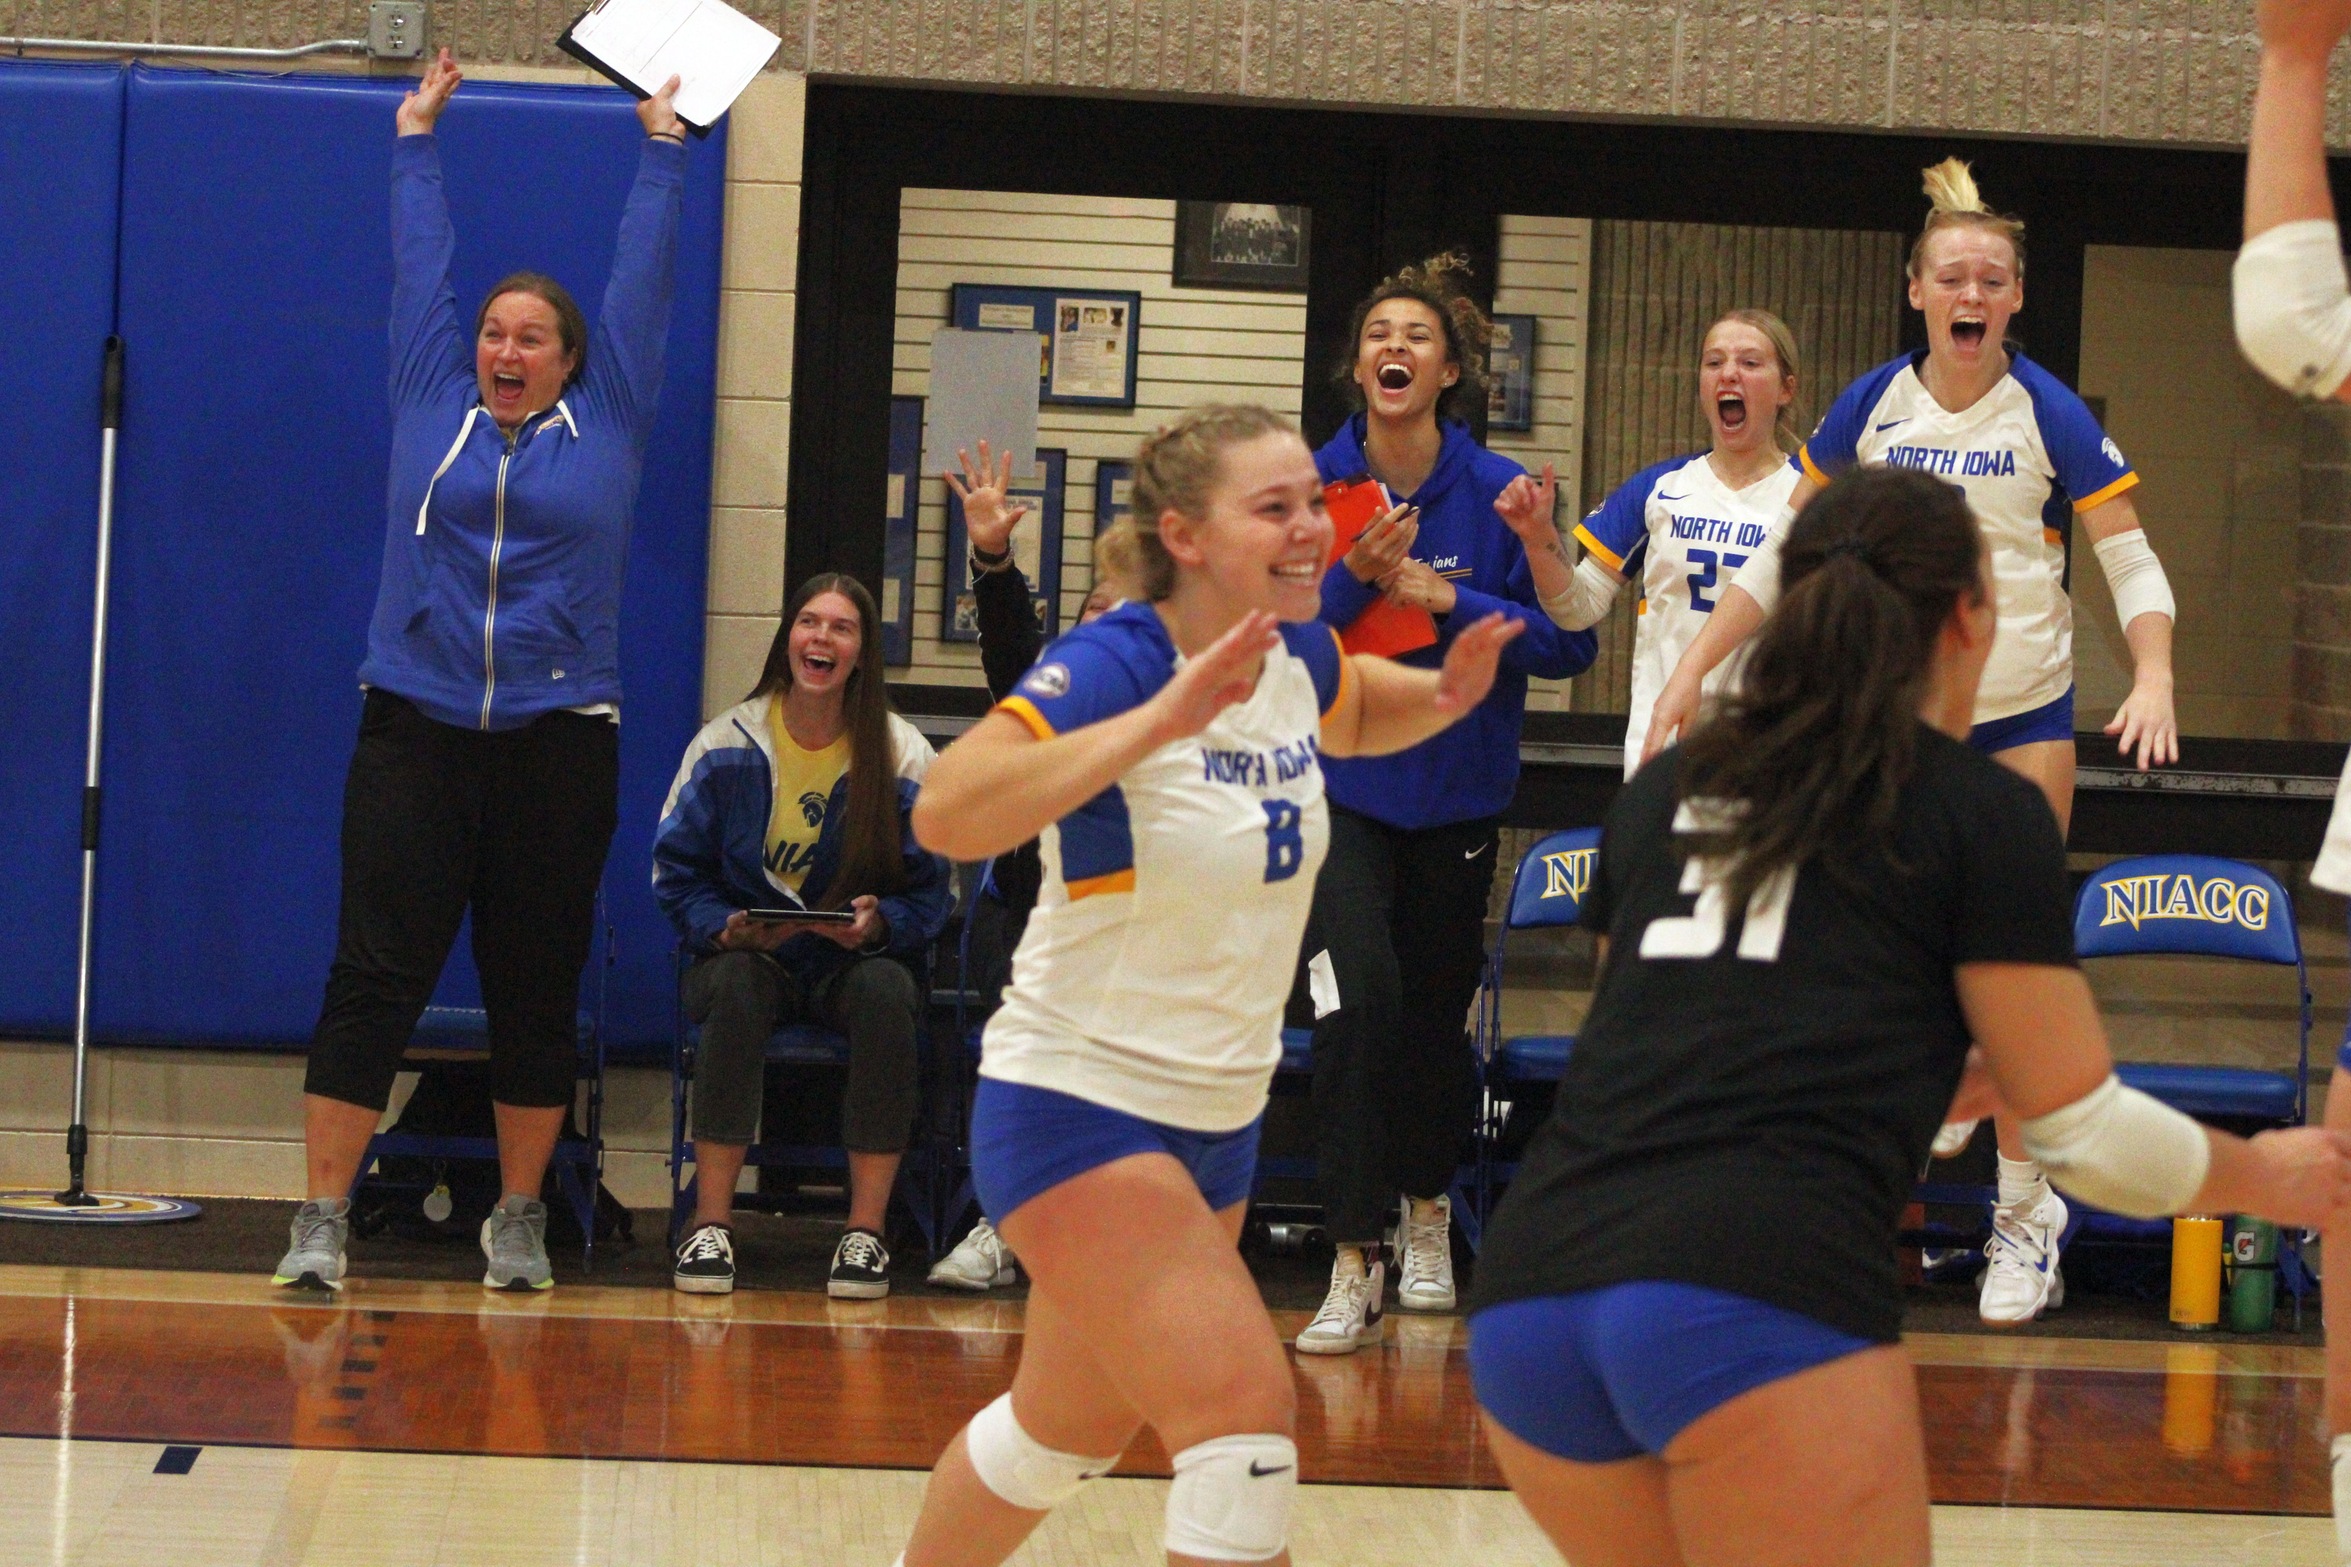 NIACC celebrates its 3-2 win over Ellsworth on Saturday at the NIACC volleyball tournament.